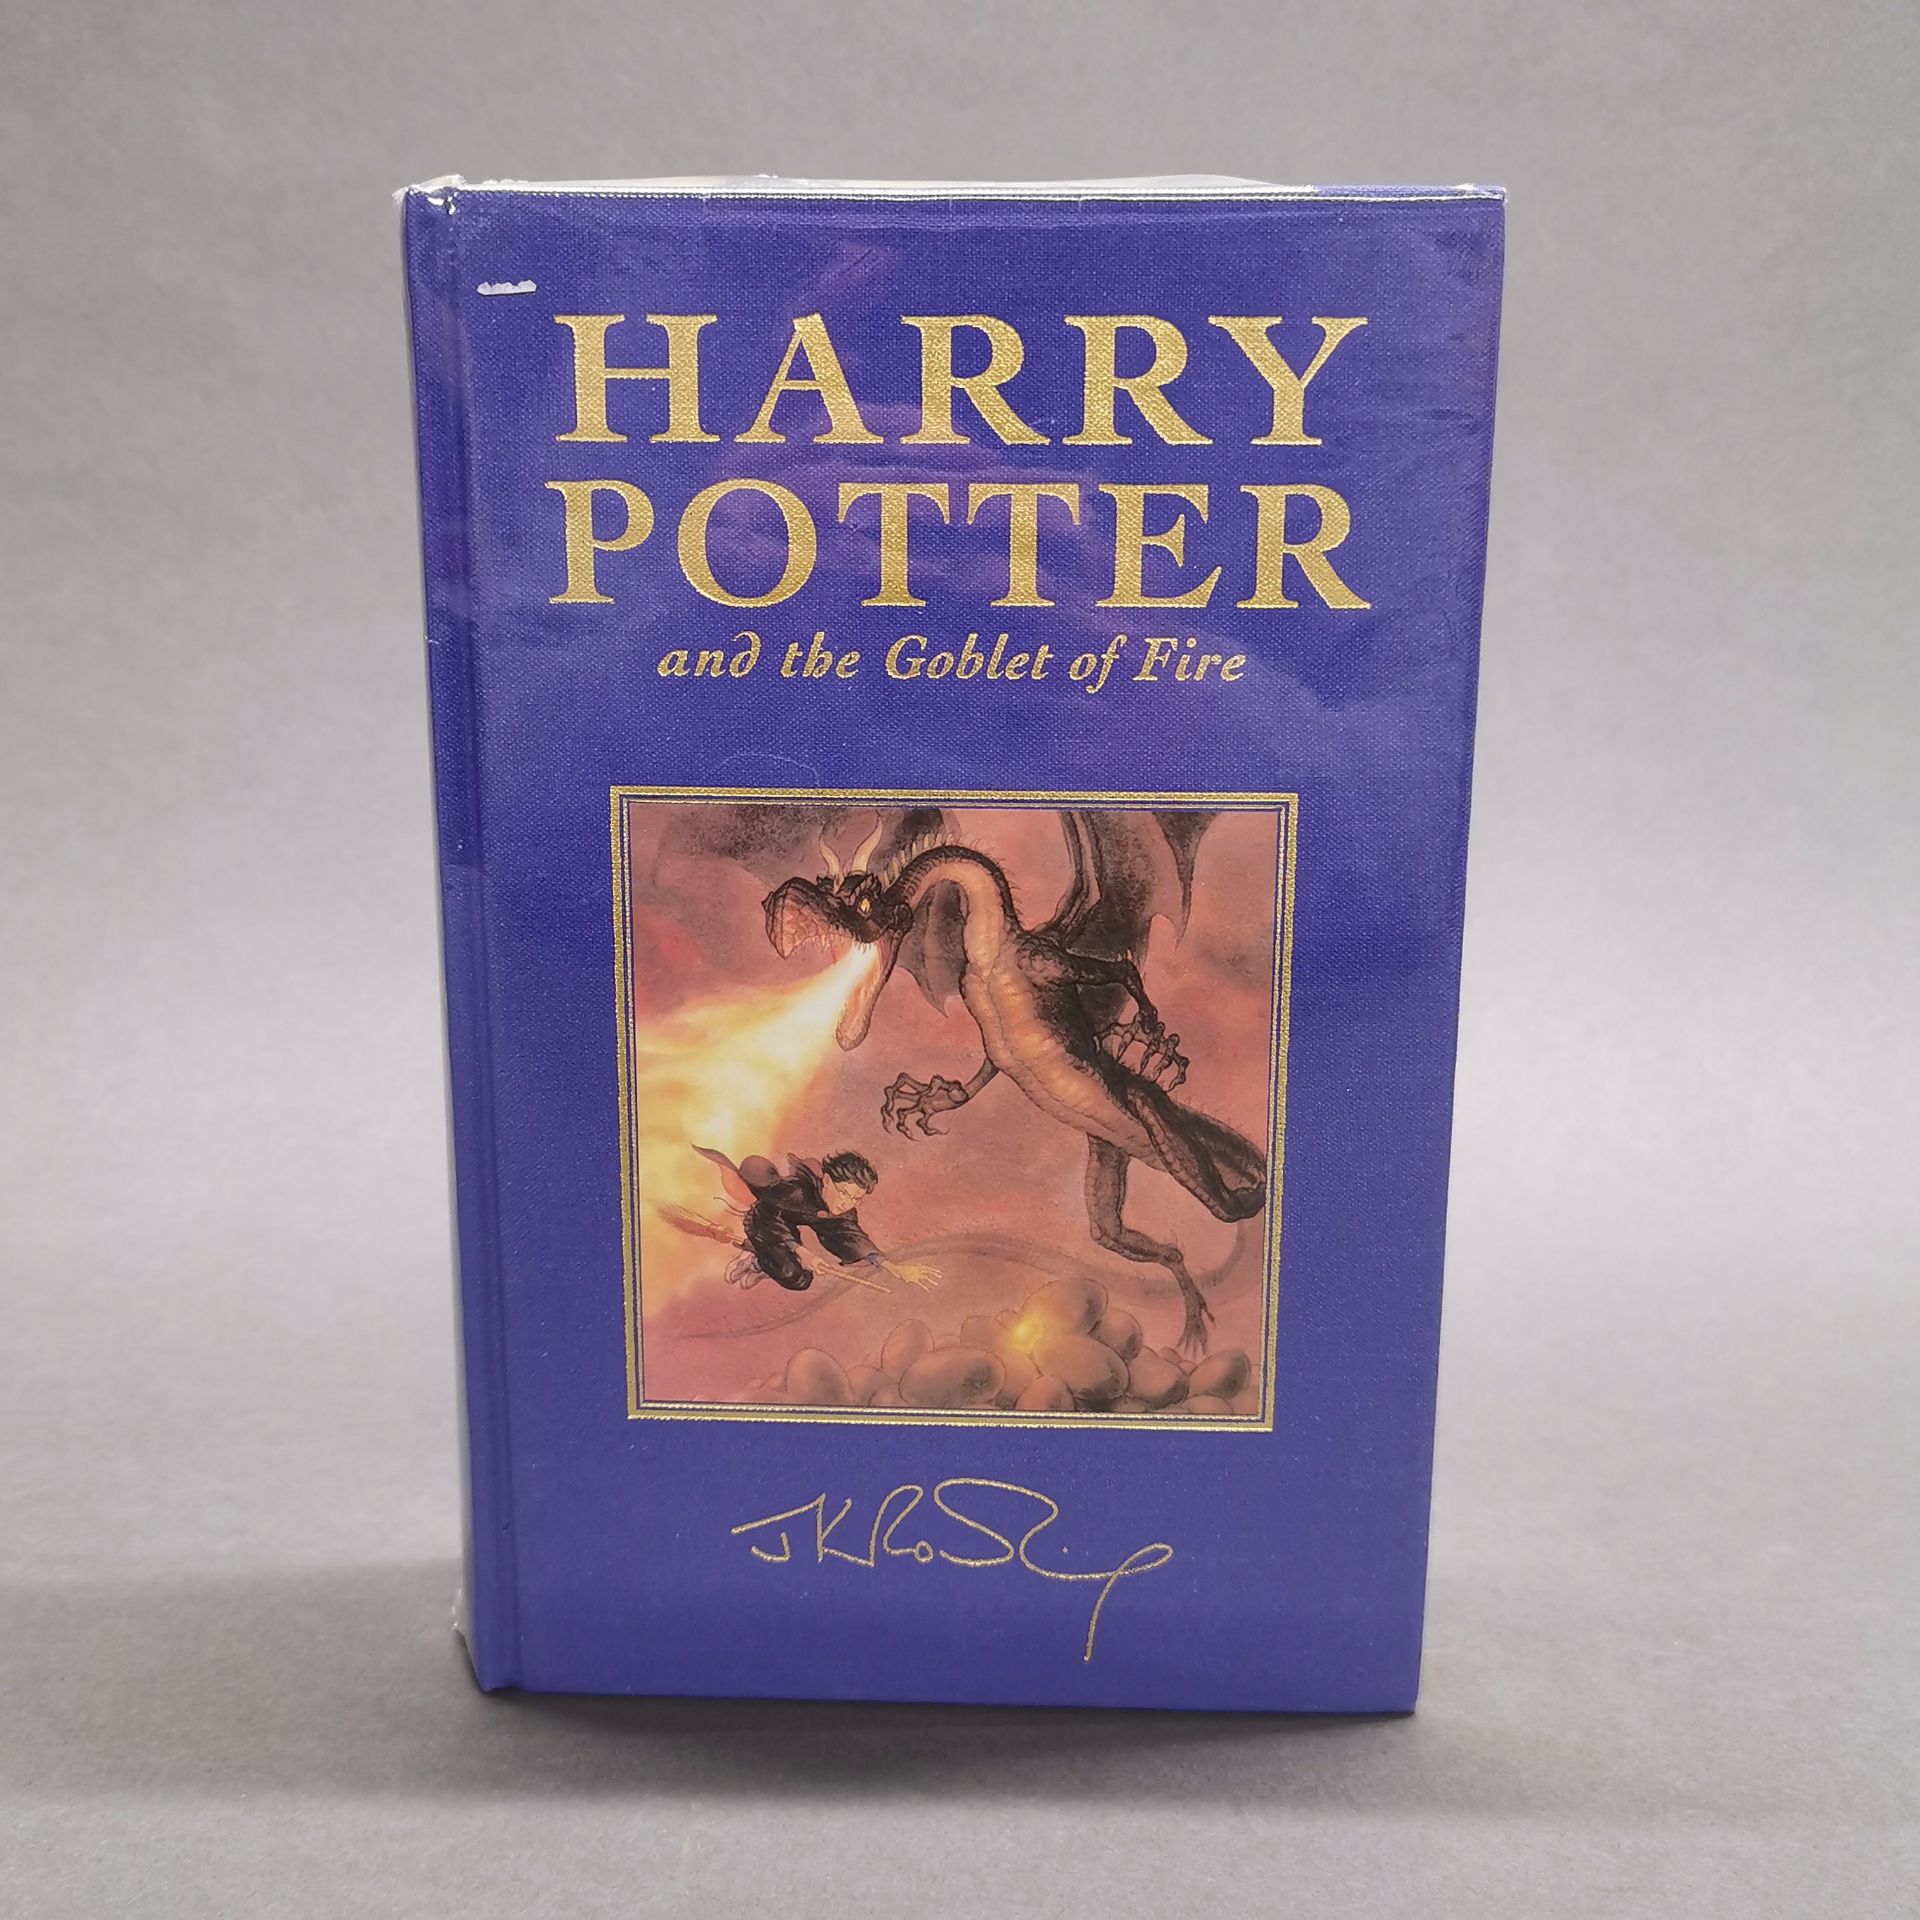 A first edition sealed hardback Harry Potter and the Goblet of Fire novel.